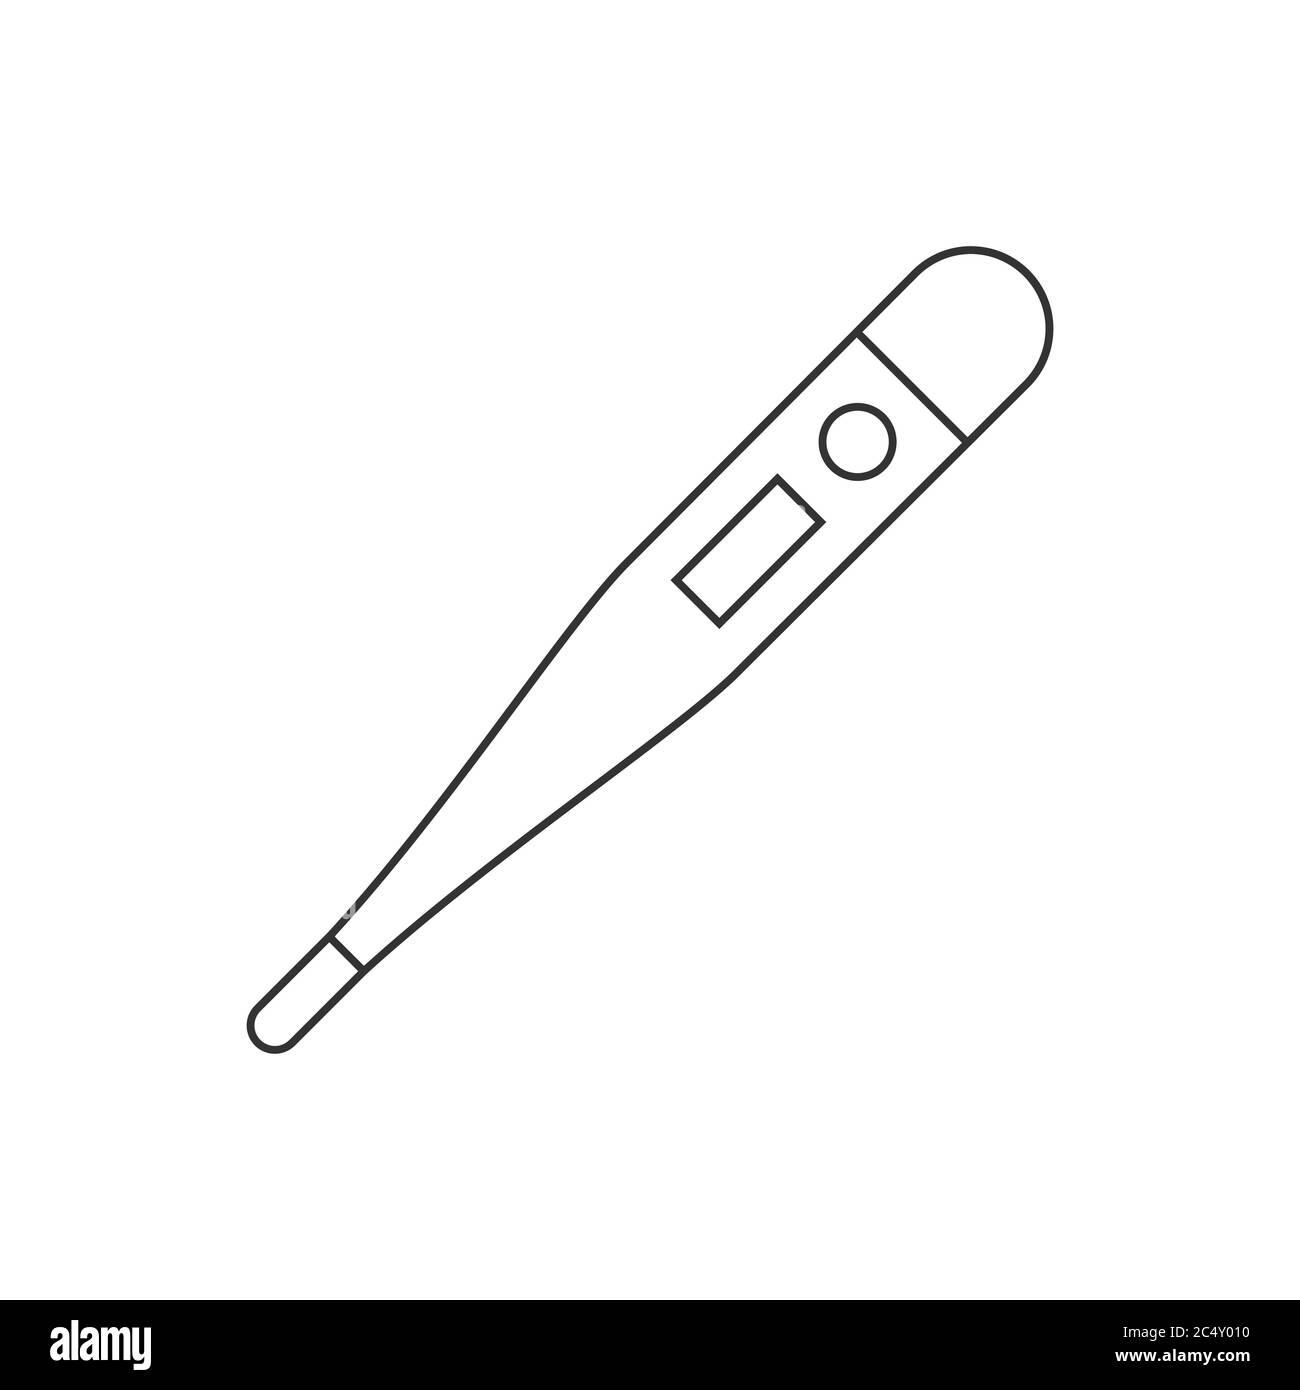 Digital thermometer line icon. Black outline on white background. Electronic body measurement tool. Medical supplies. Having fever. Vector Stock Vector